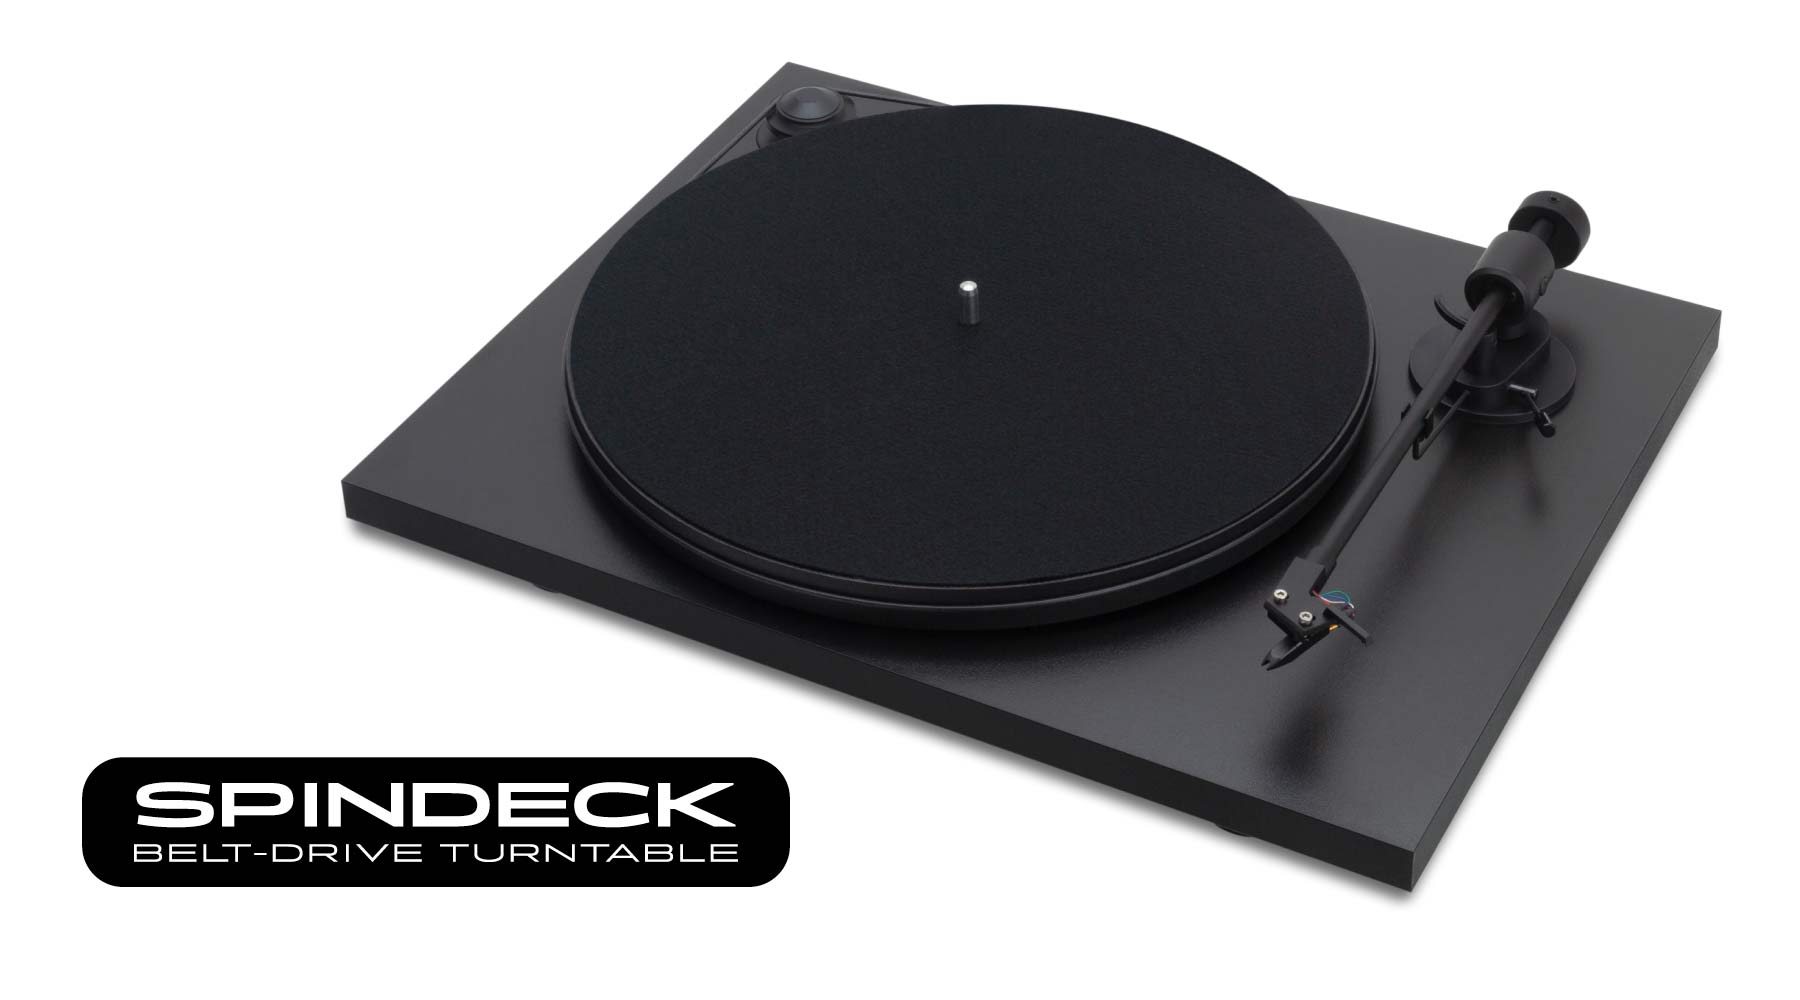 Spindeck Belt-Drive Turntable by Andover